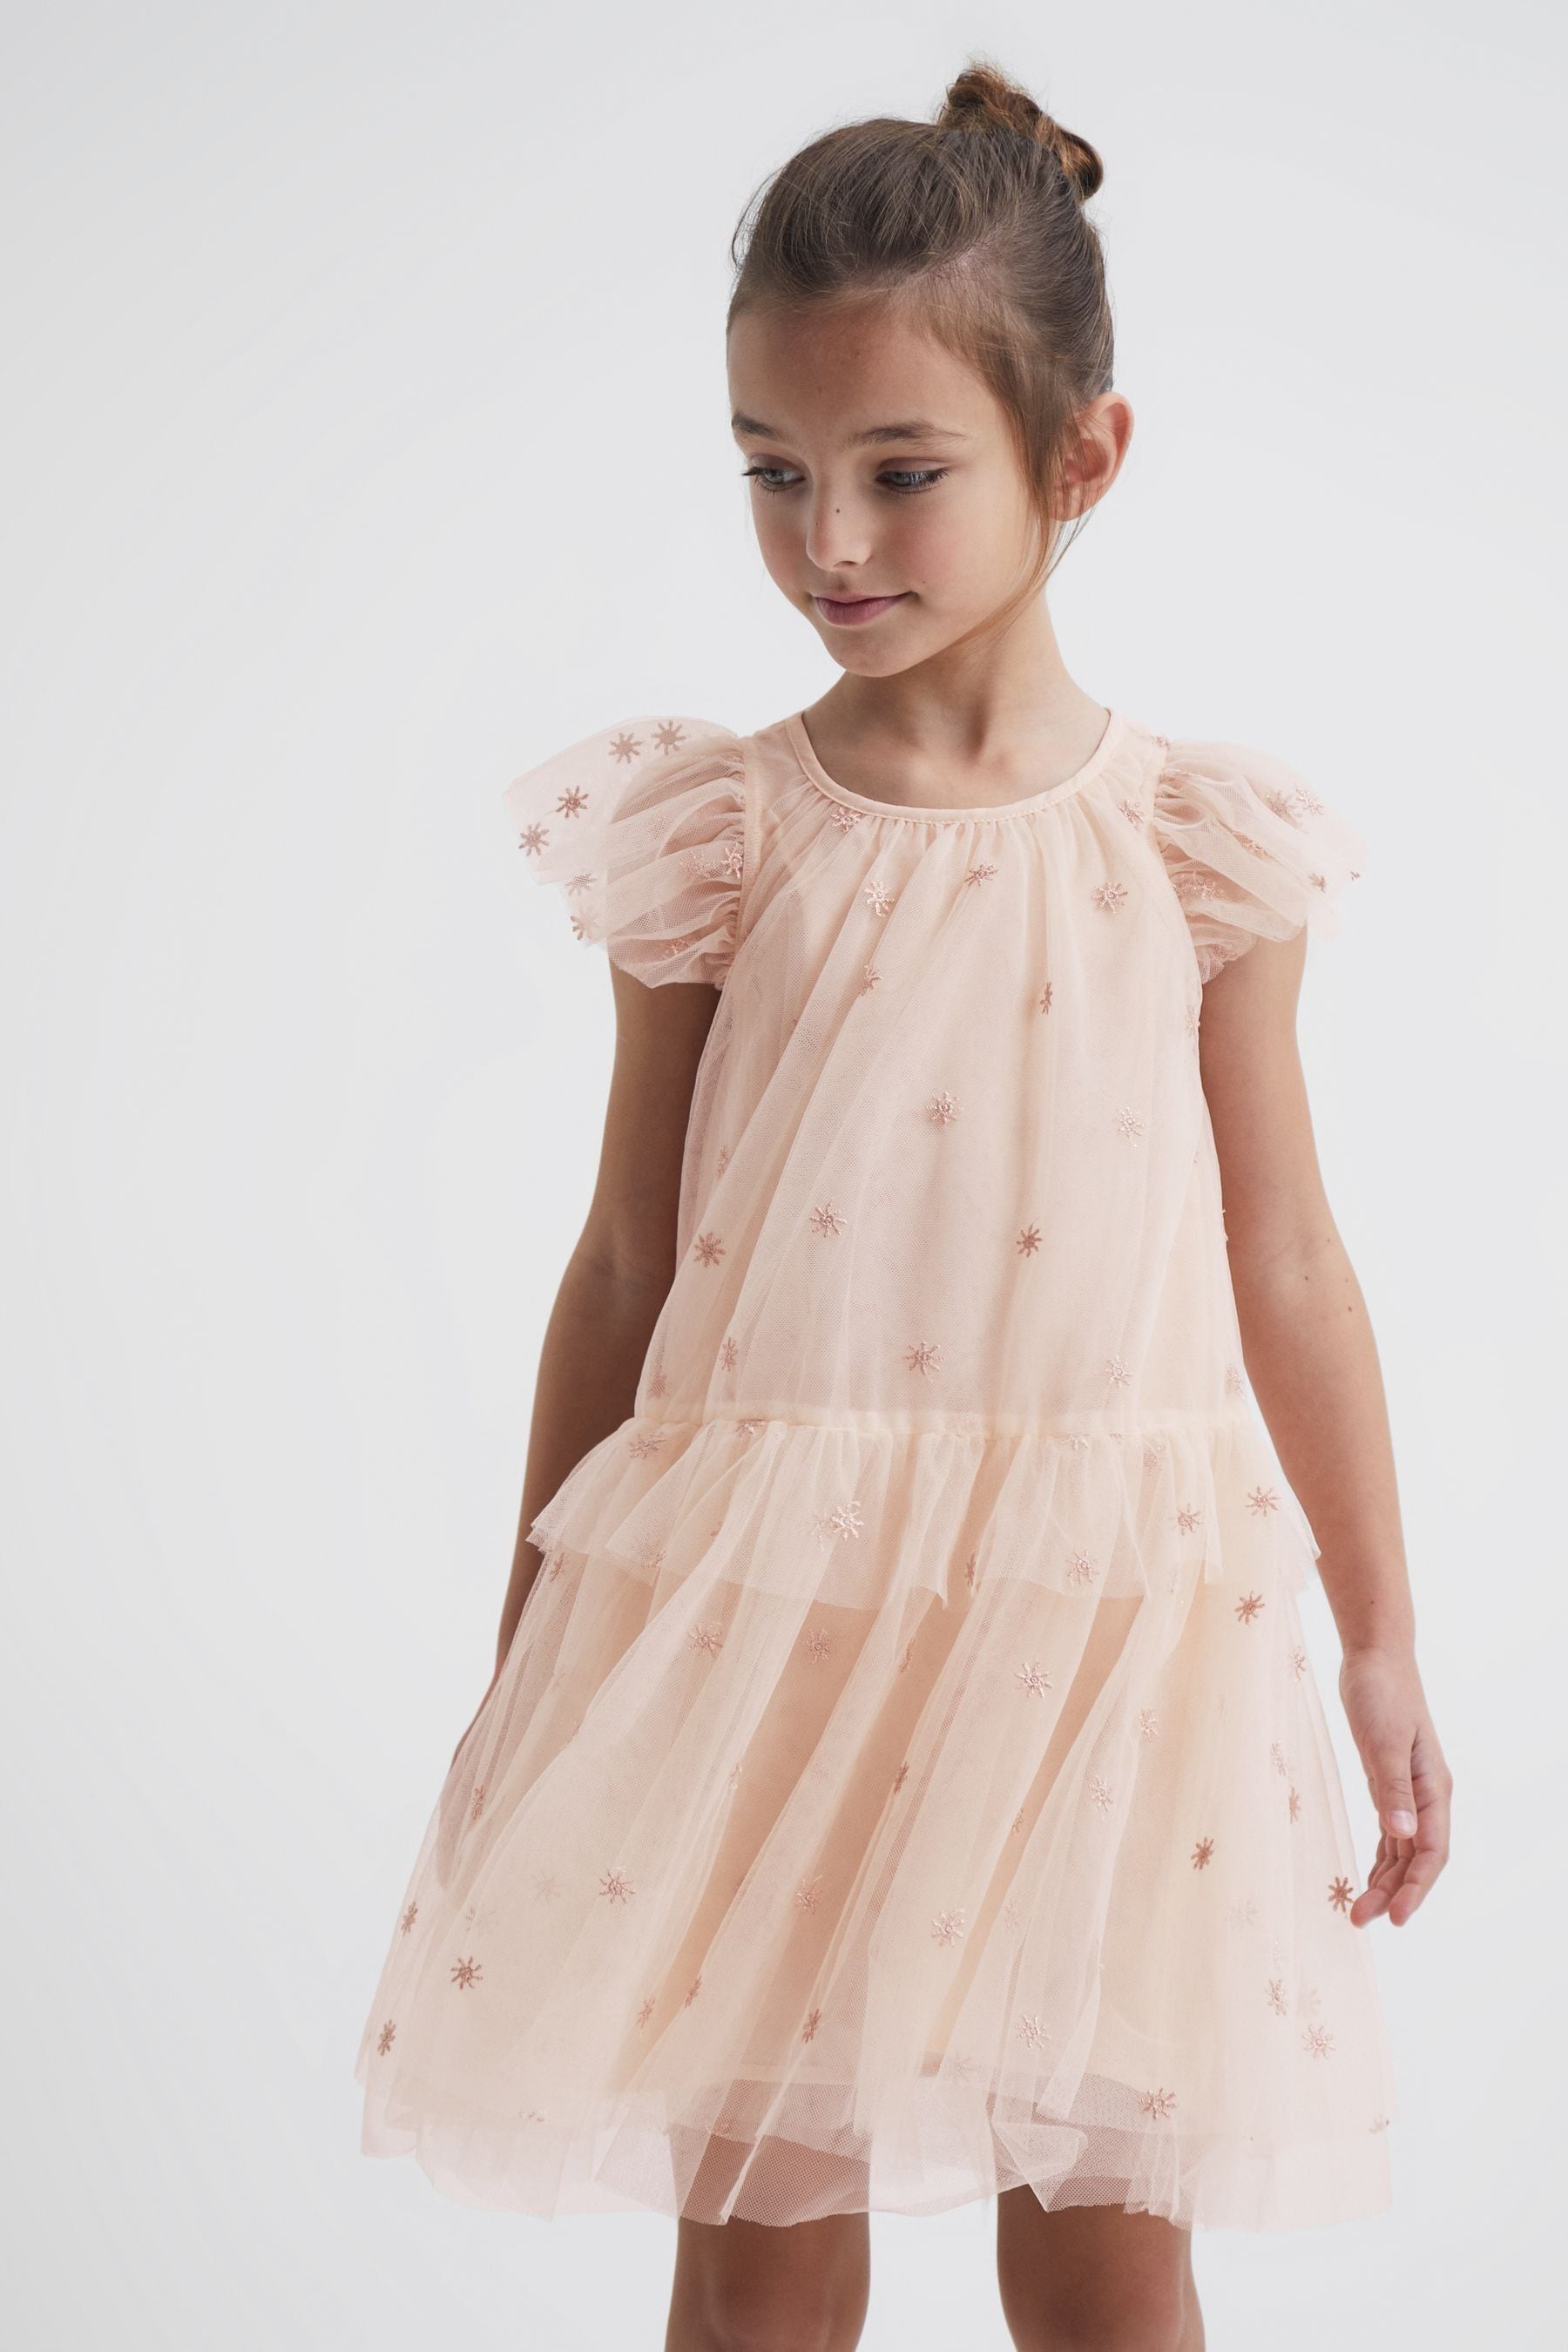 Reiss Fifi - Pale Pink Senior Tulle Embroidered Dress, Uk 9-10 Yrs